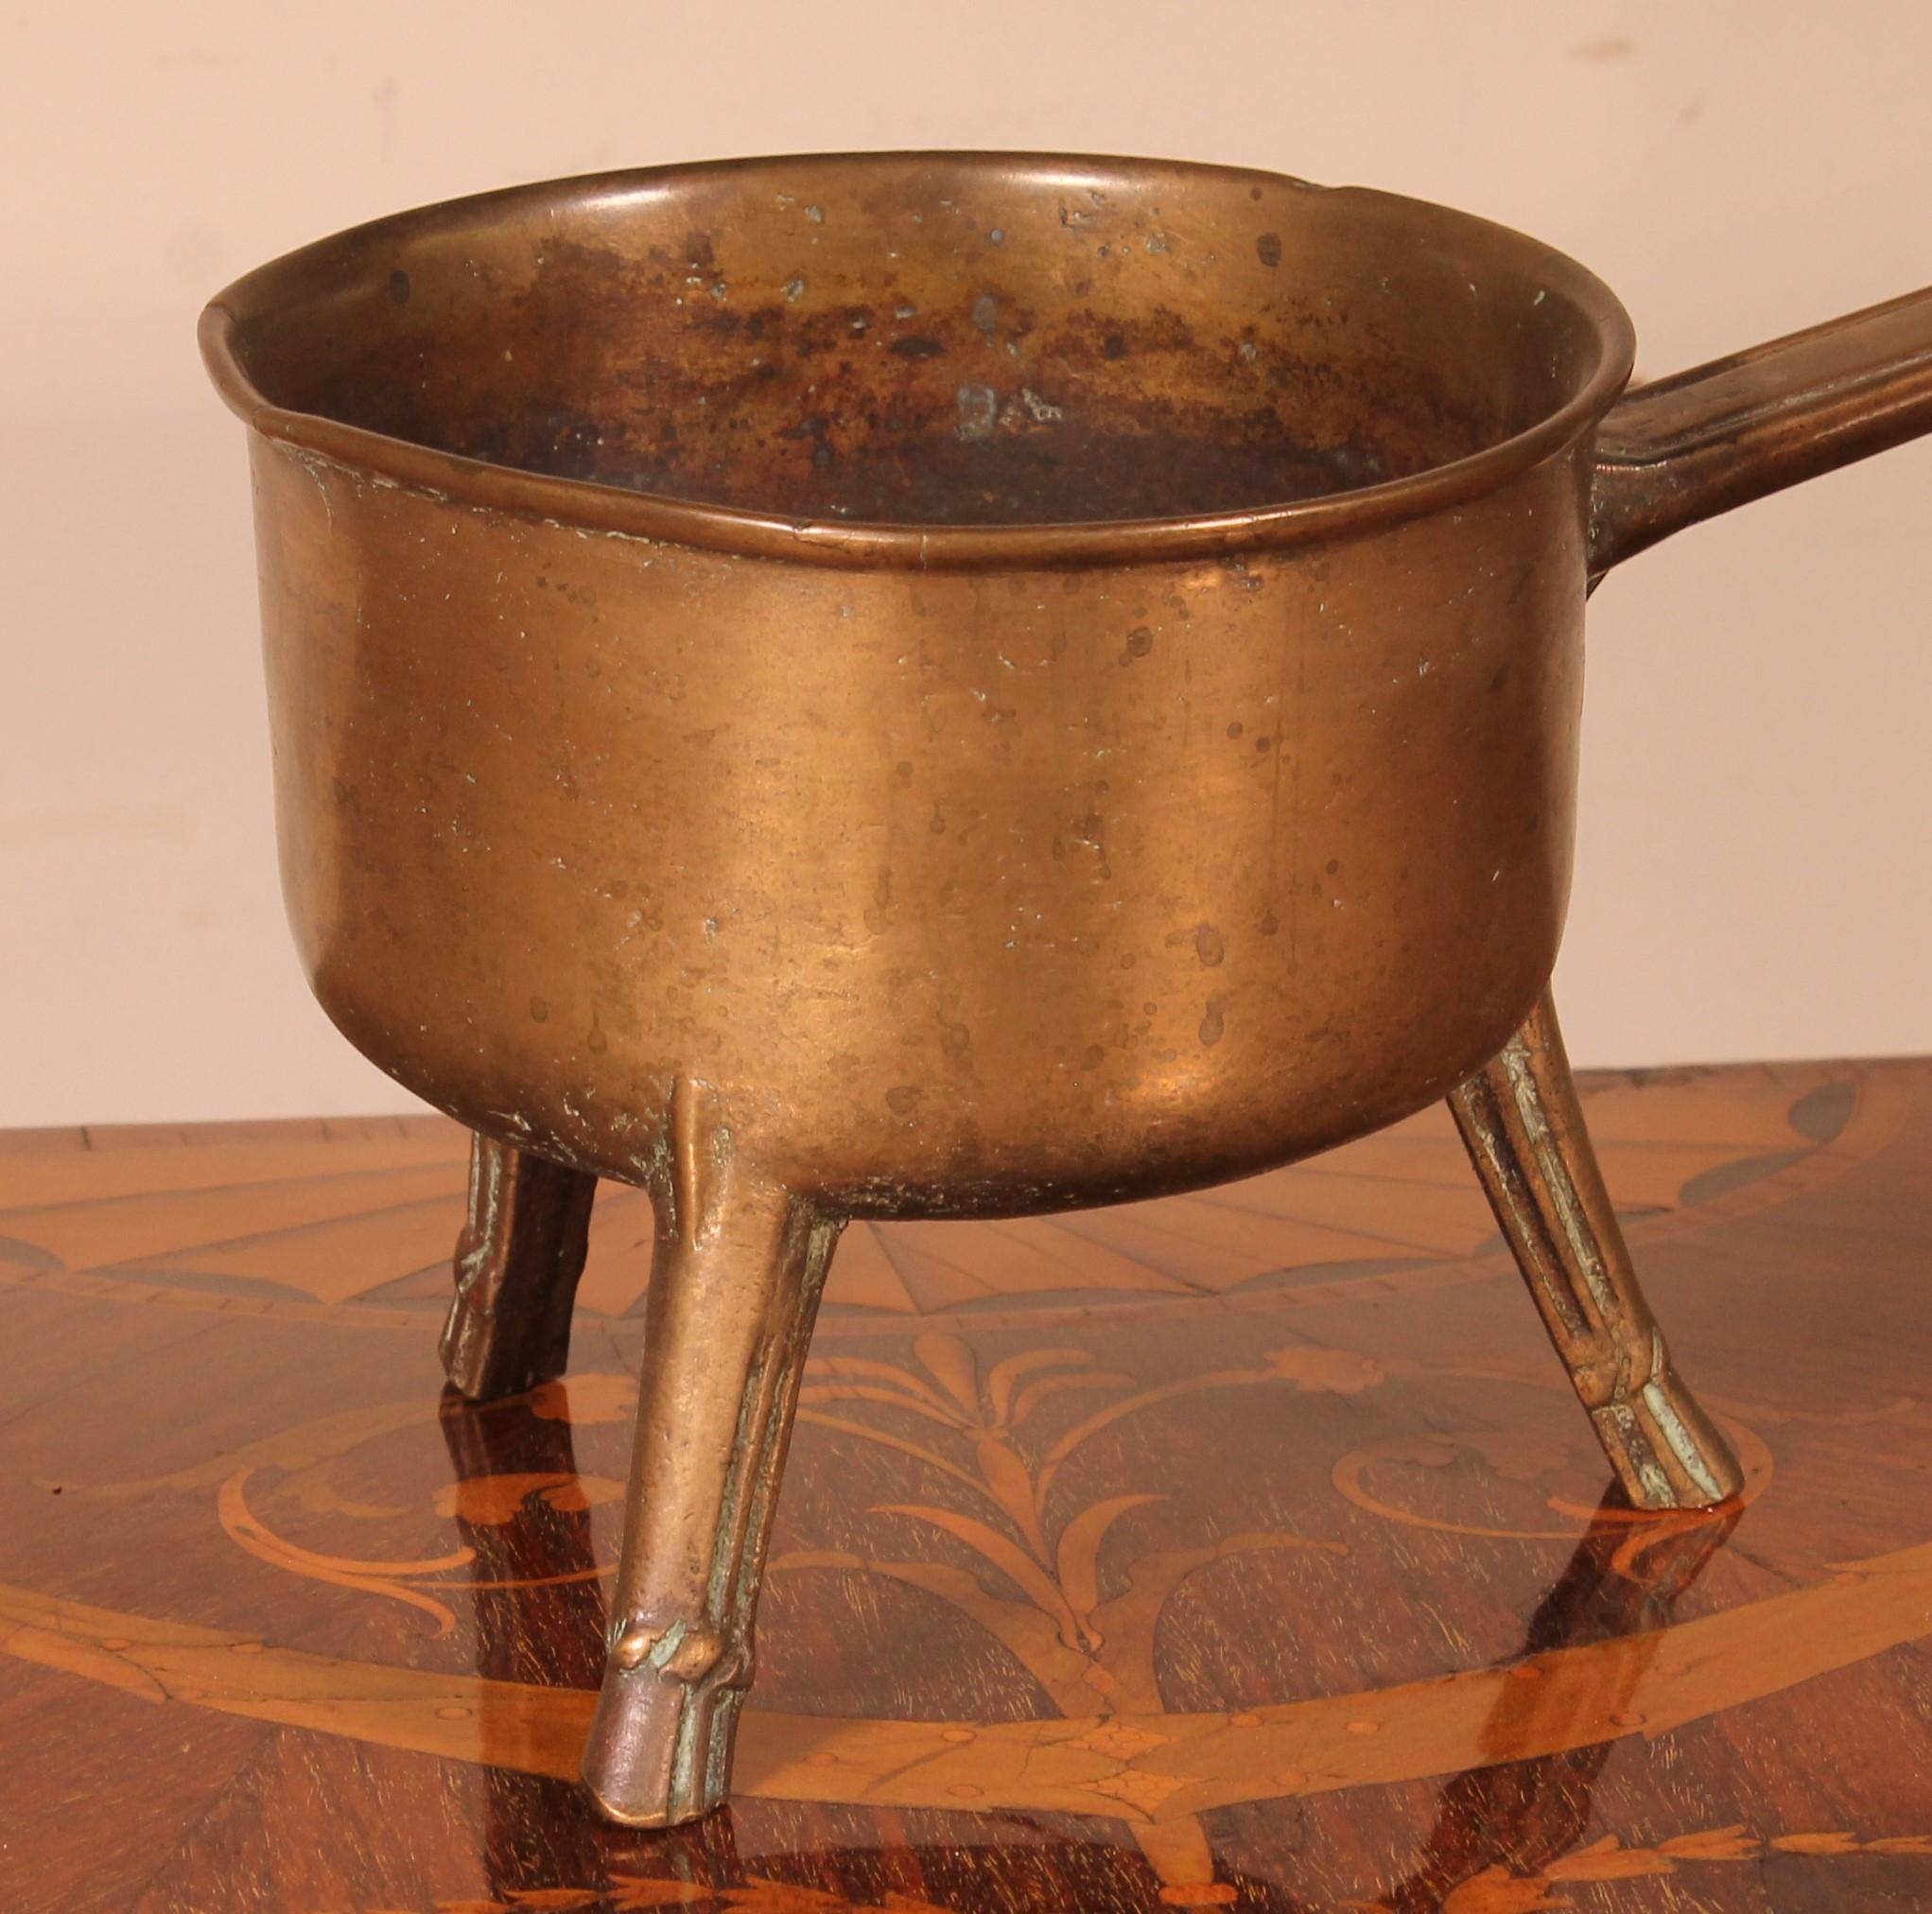 Apothecary tripod skillet from the end of the 17th century beginning of the 18th century From England.
The skillet is in superb condition and has not undergone any restorations.
Bronze with a very beautiful patina.
 